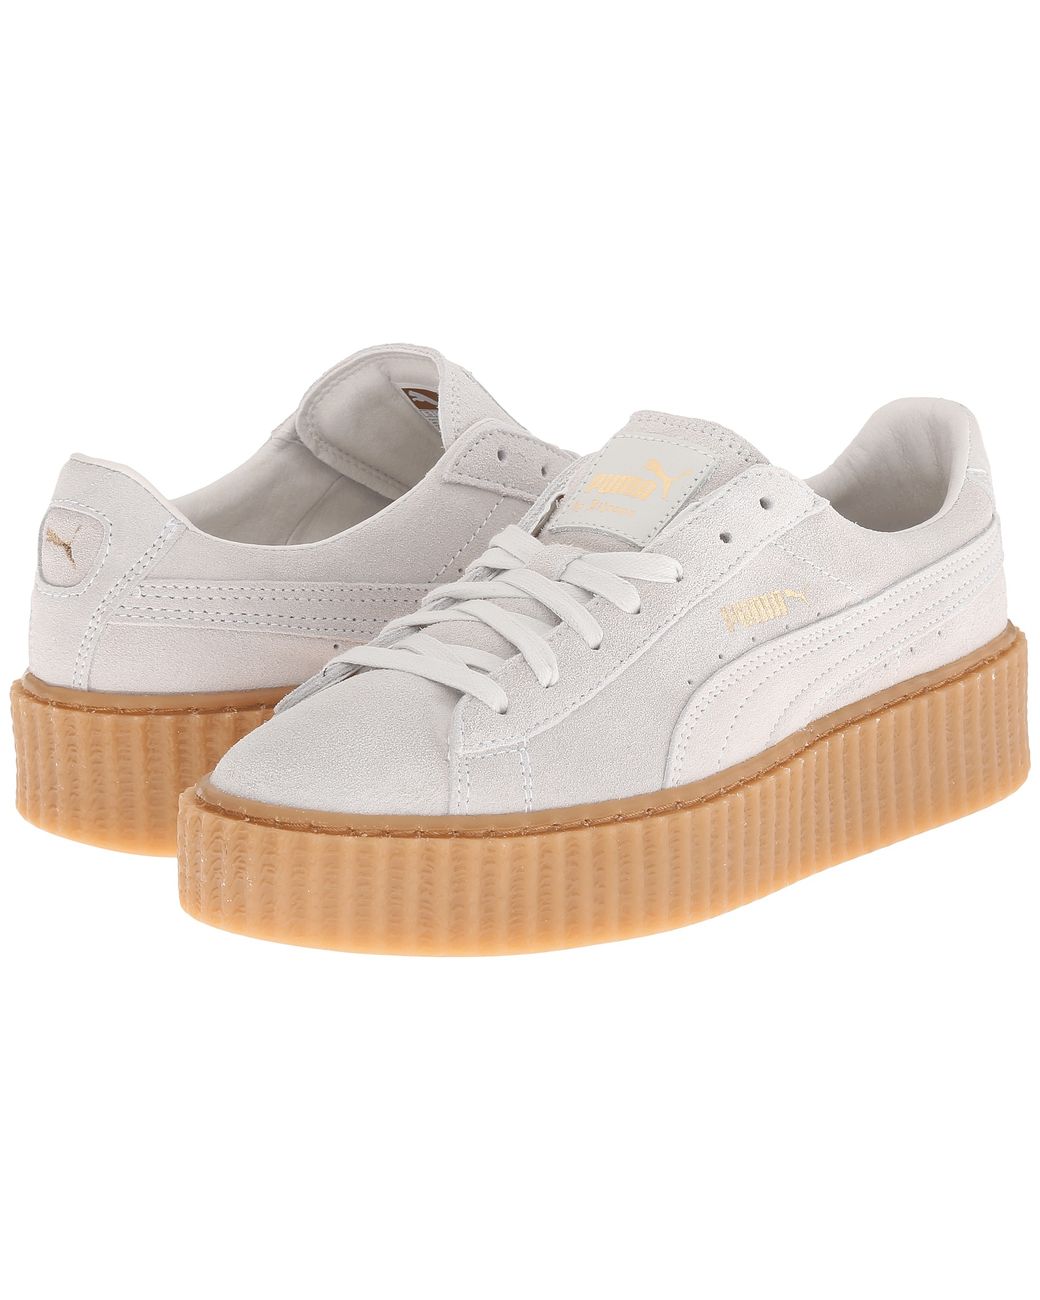 PUMA Rihanna X Suede Creepers in White |